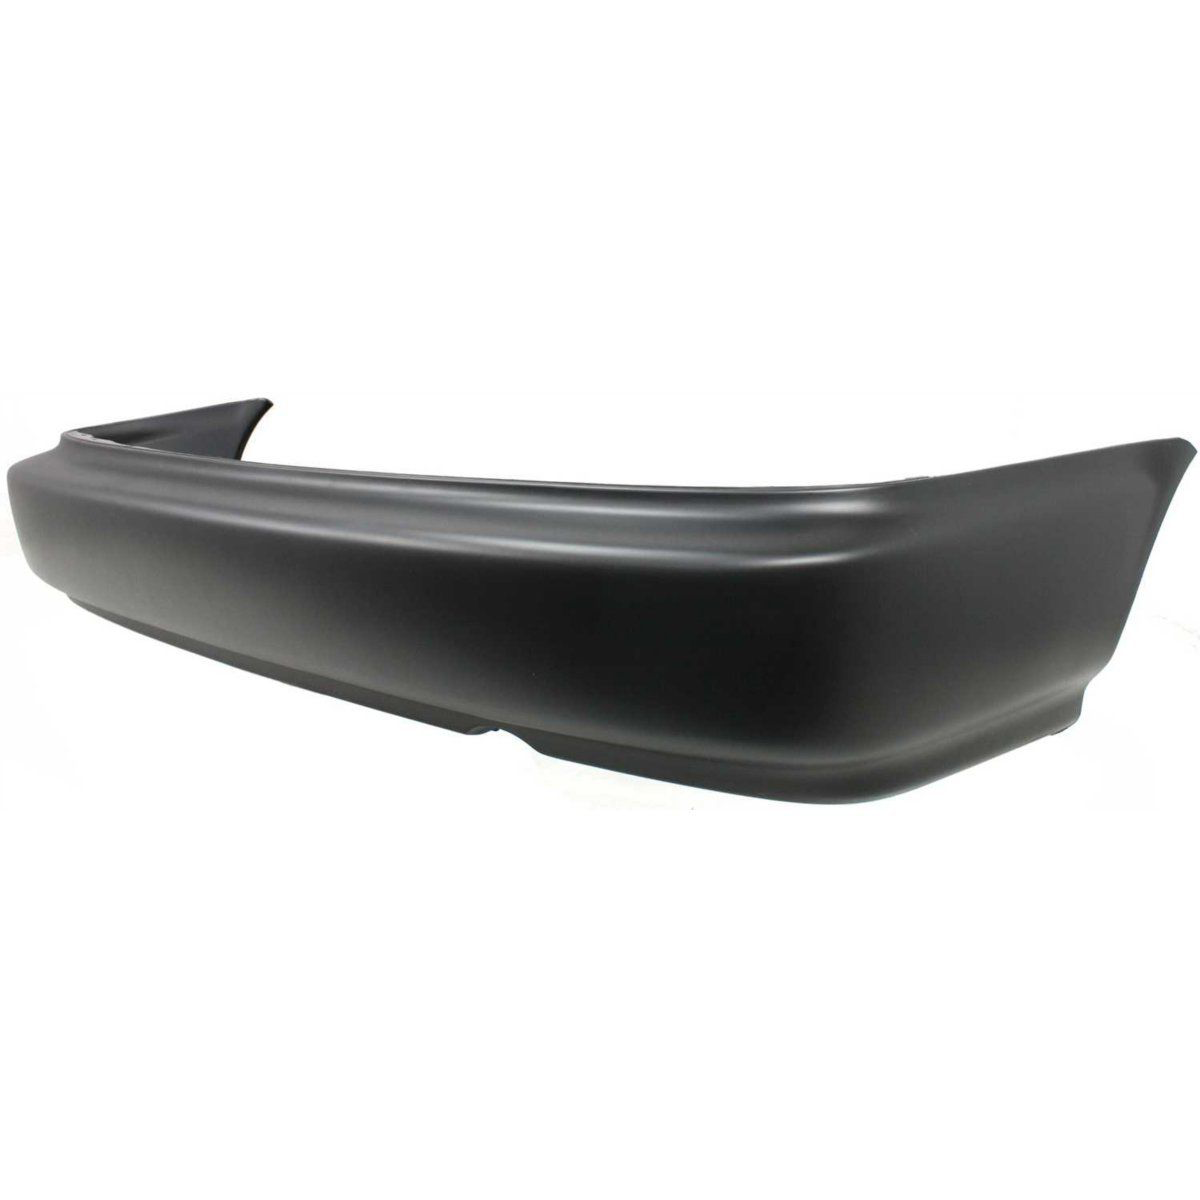 1996-1998 HONDA CIVIC Rear Bumper Cover 2dr coupe/4dr sedan  USA/Canada built Painted to Match